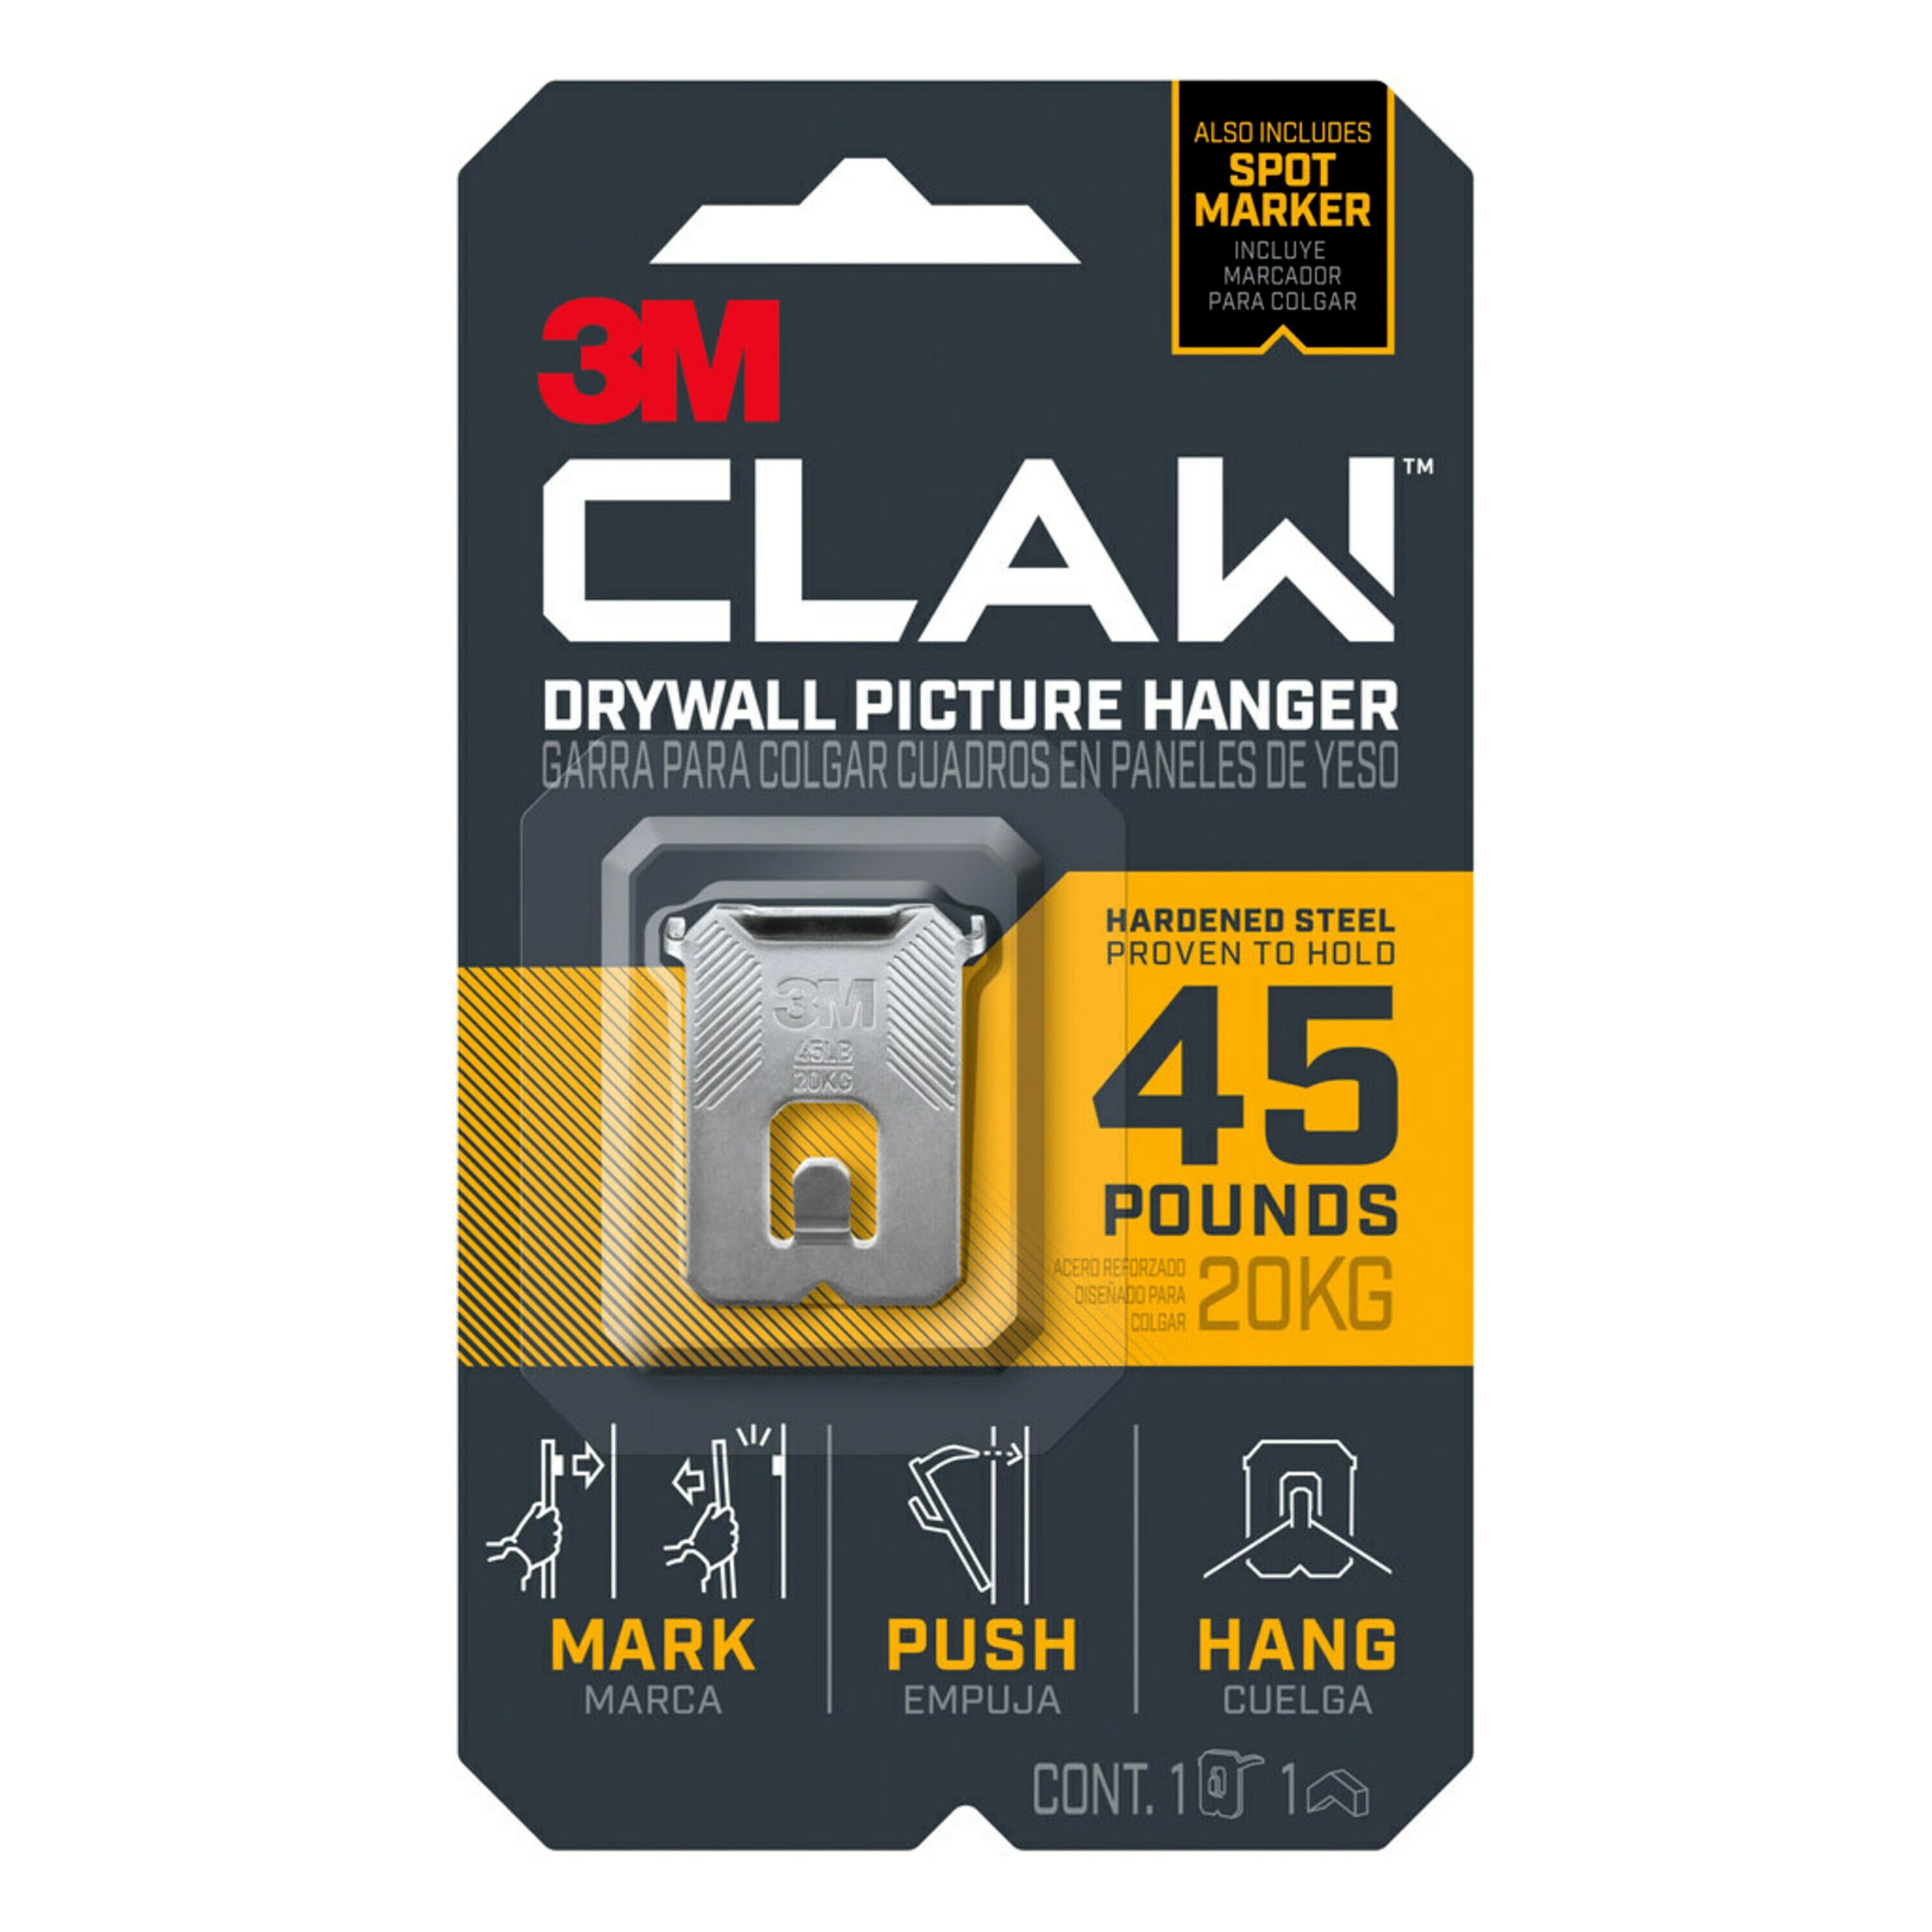 3M 45-Pound Claw Drywall Picture Hanger